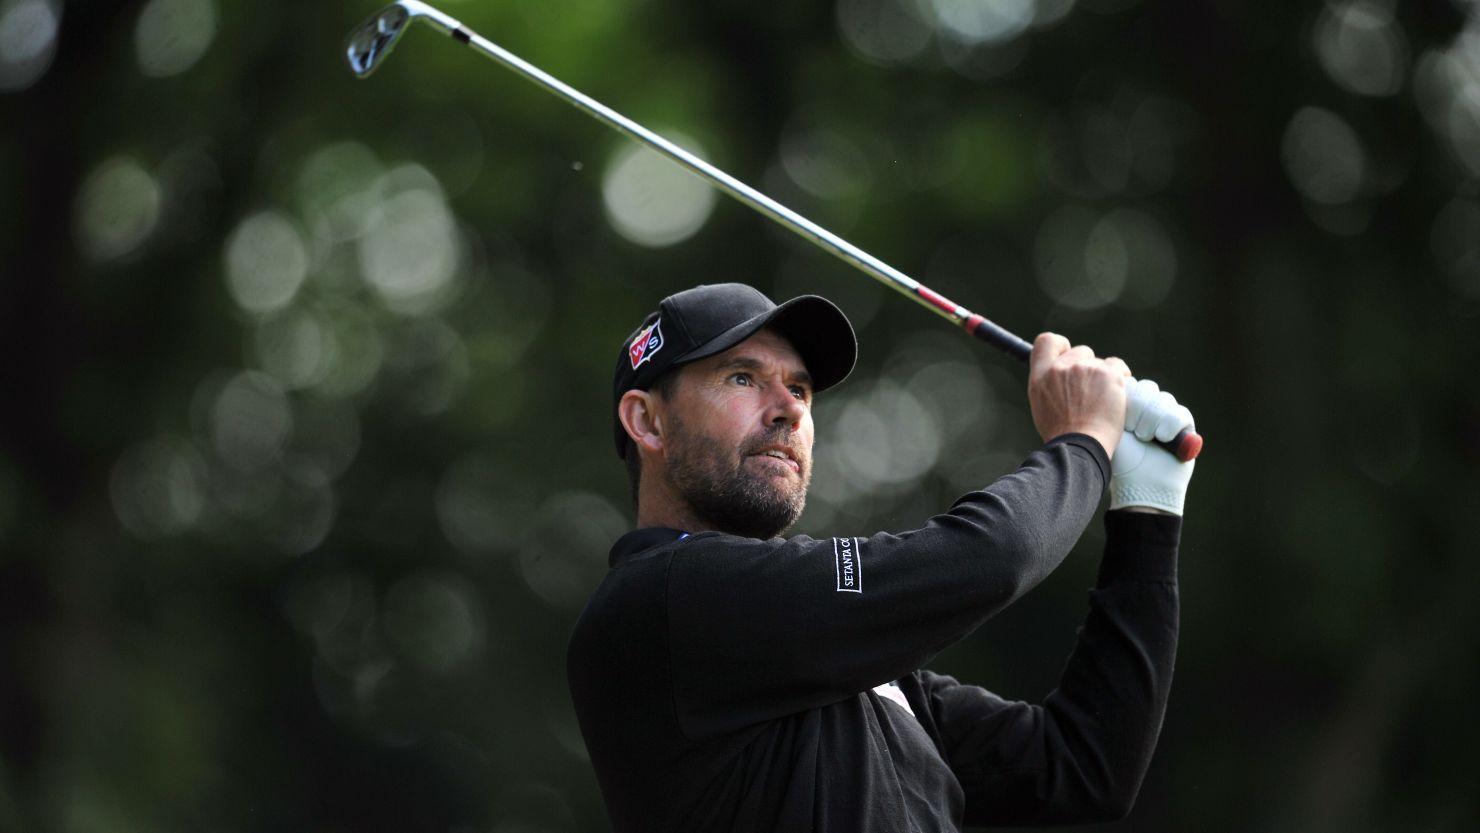 Padraig Harrinton's recent form has seen him slip down to 214th in the world rankings.